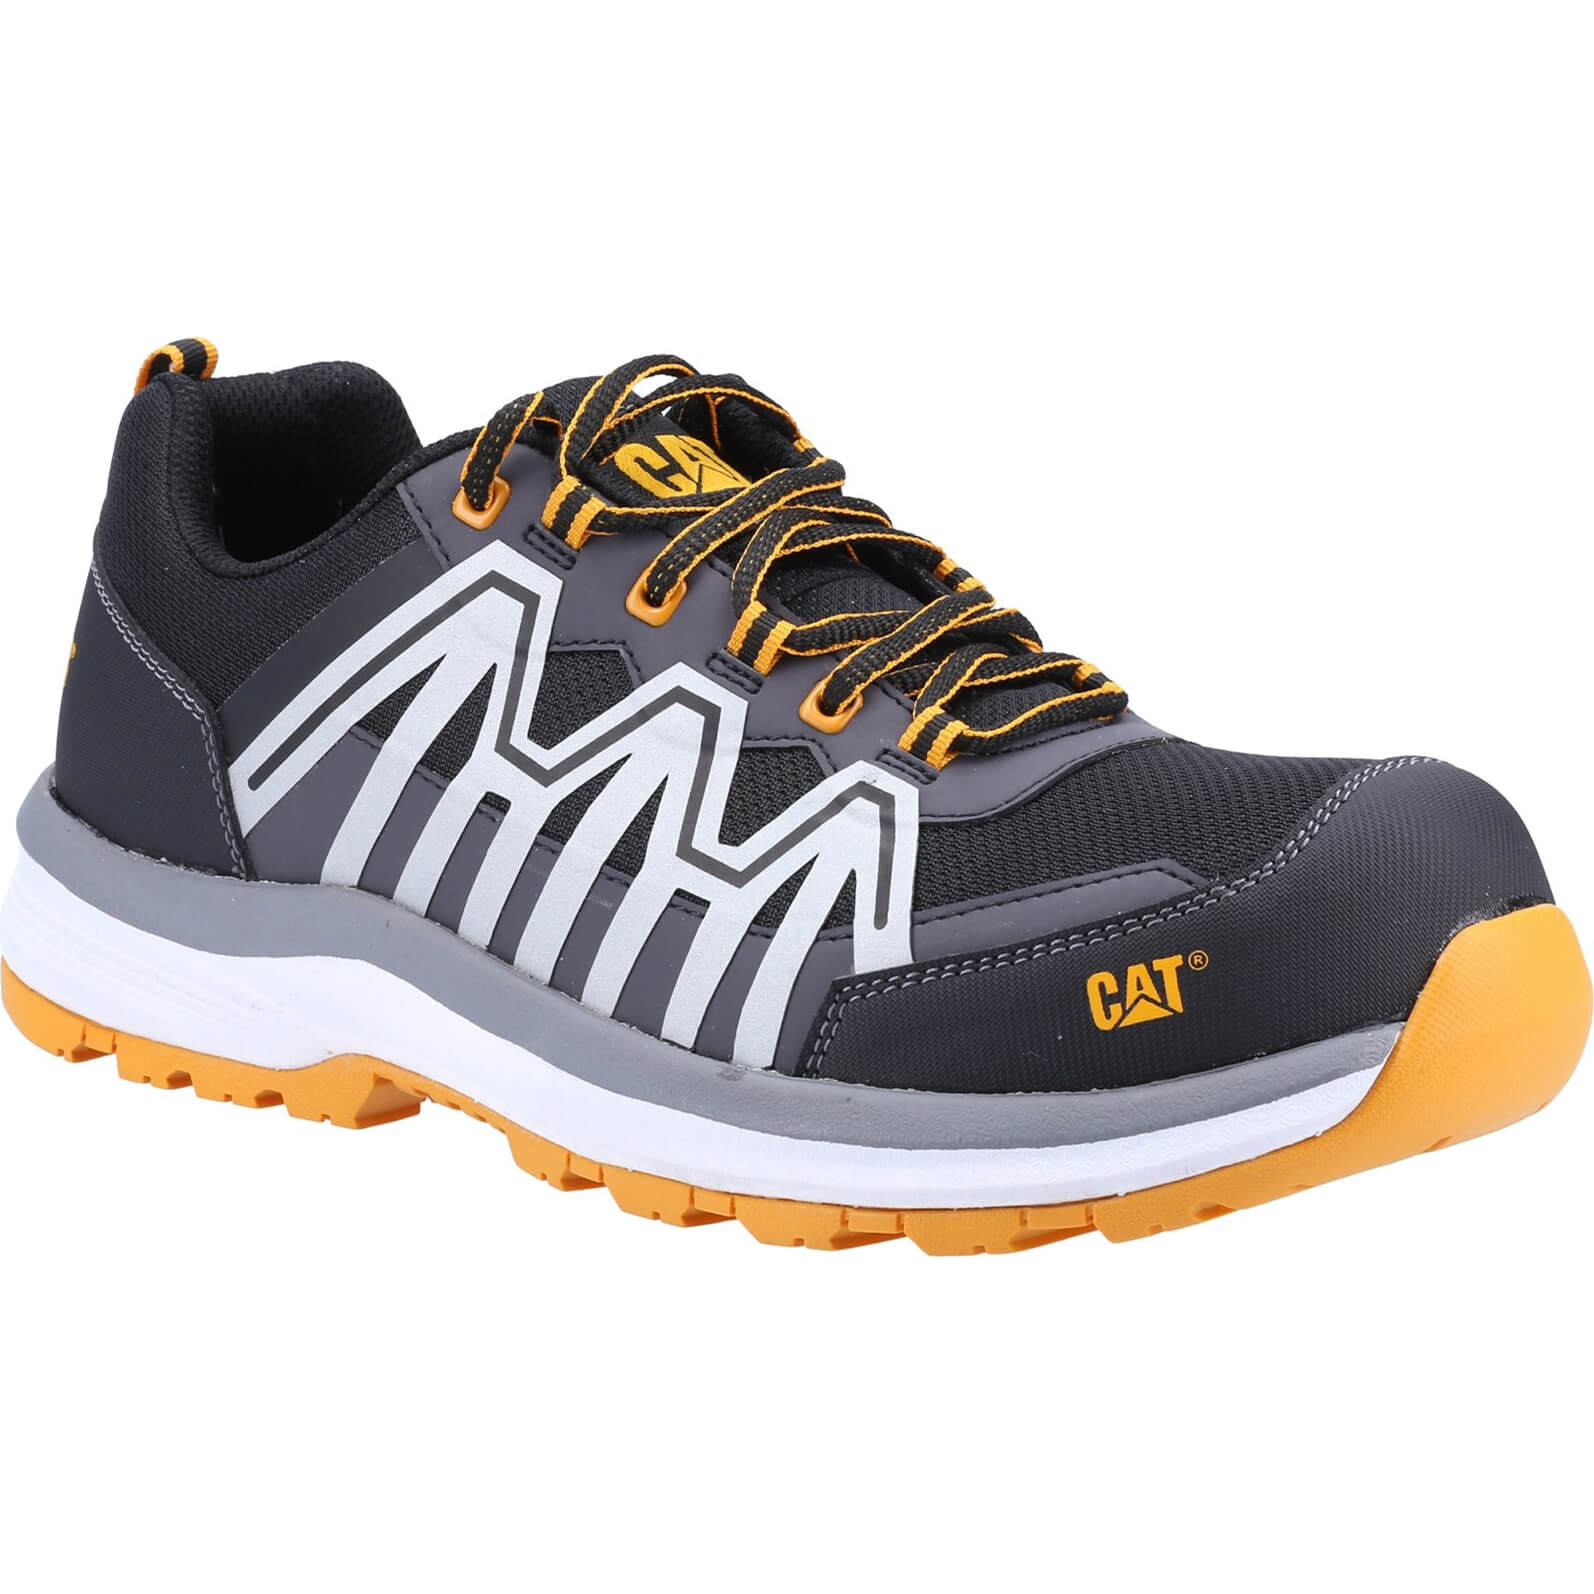 Image of Caterpillar Mens Charge S3 Safety Trainer Orange Size 7